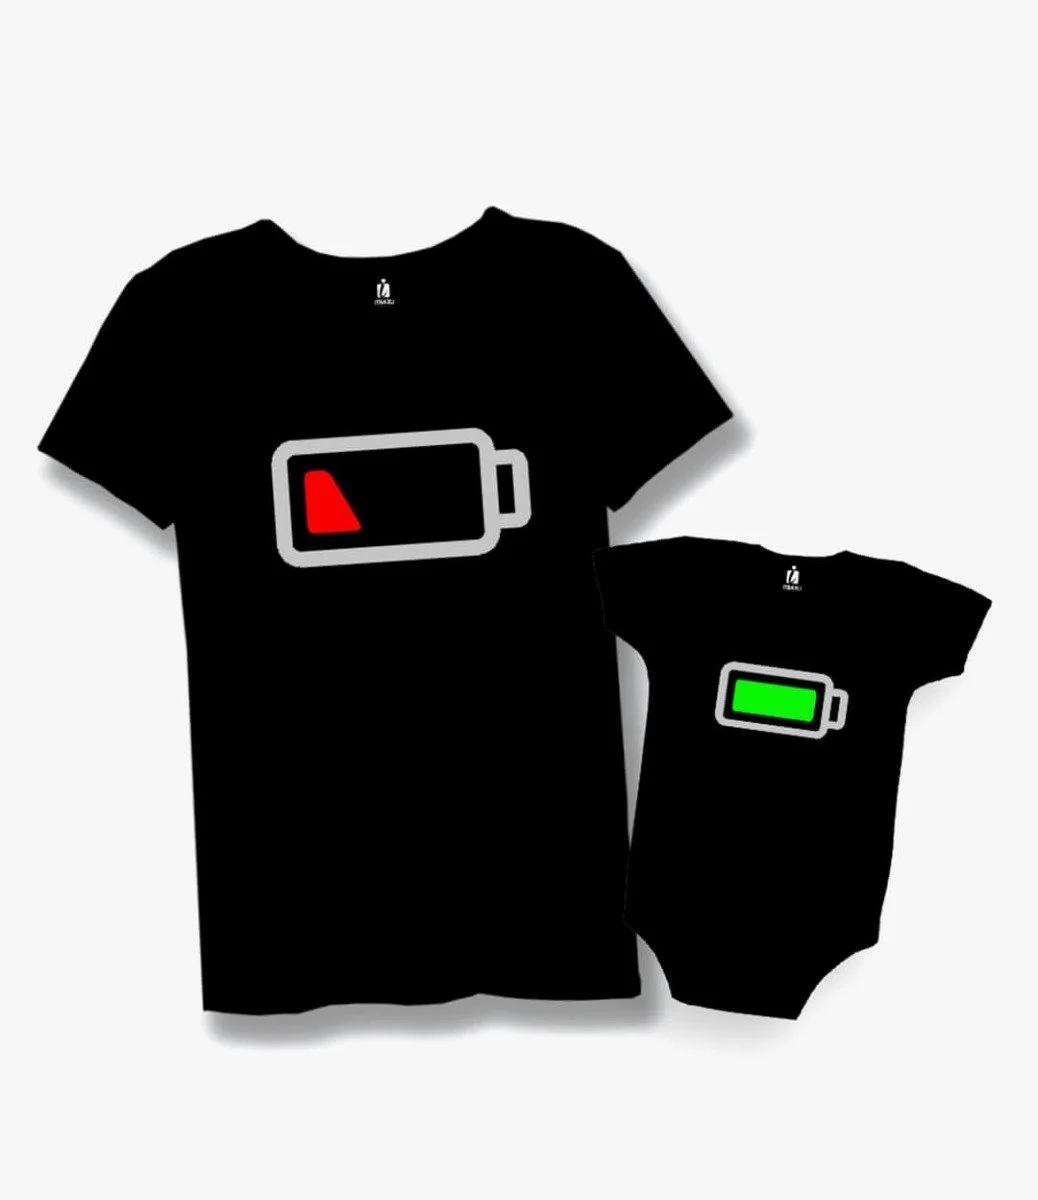 Battery Mother/Father and Baby Shirt